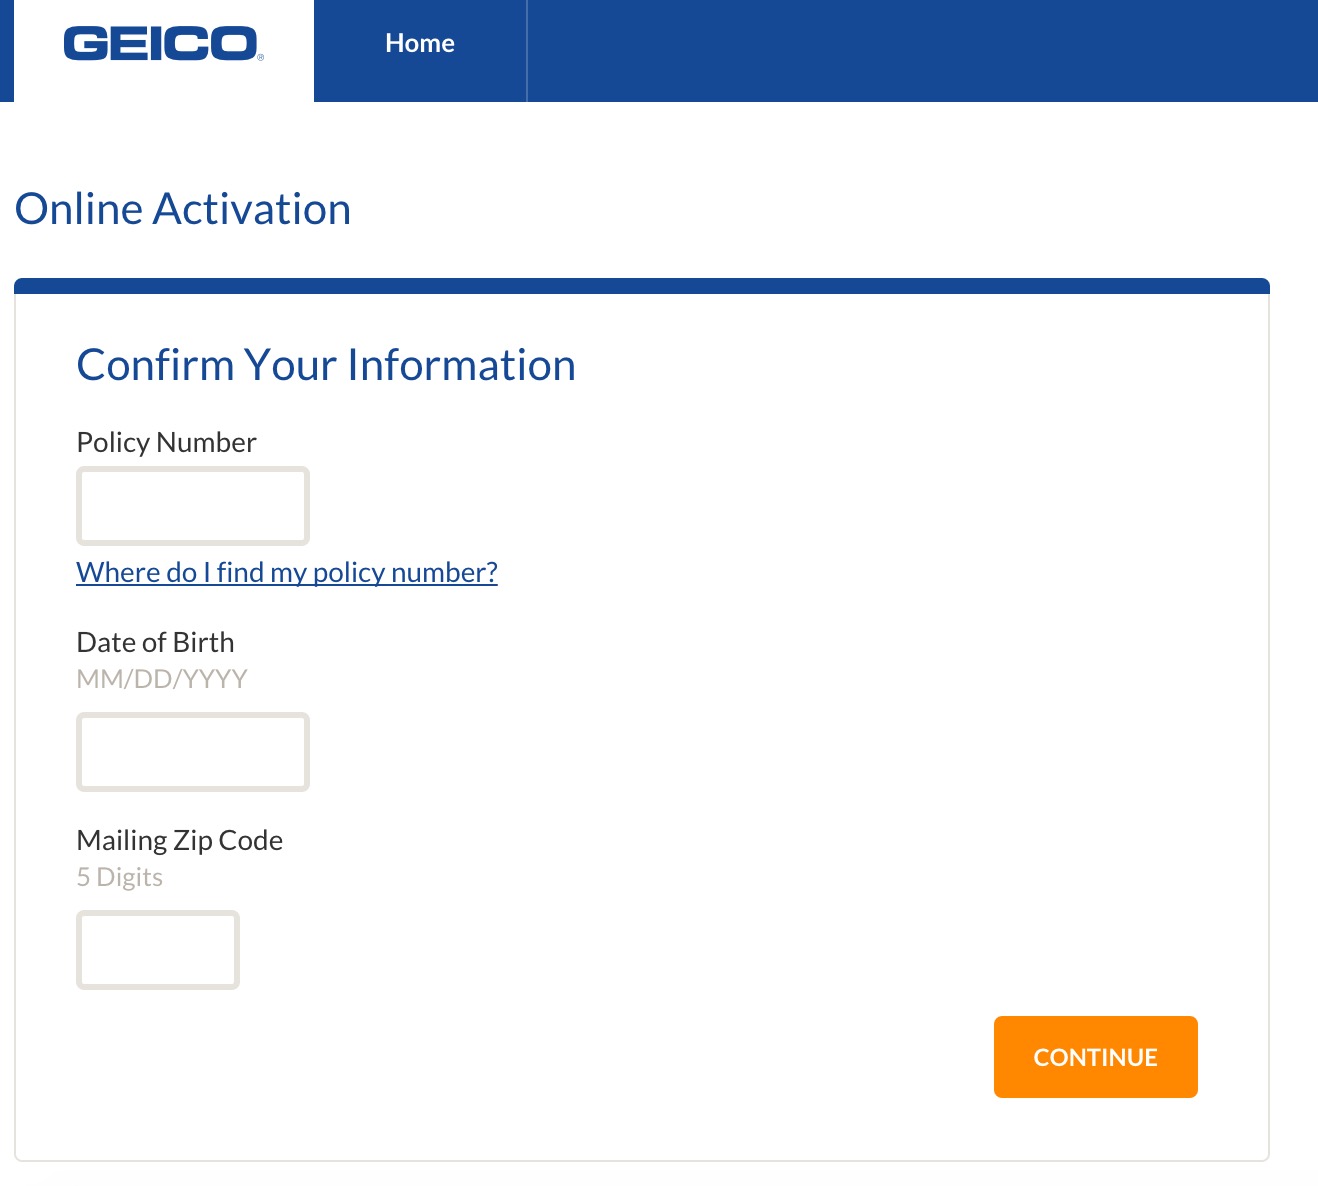 geico-online-activation-webpage